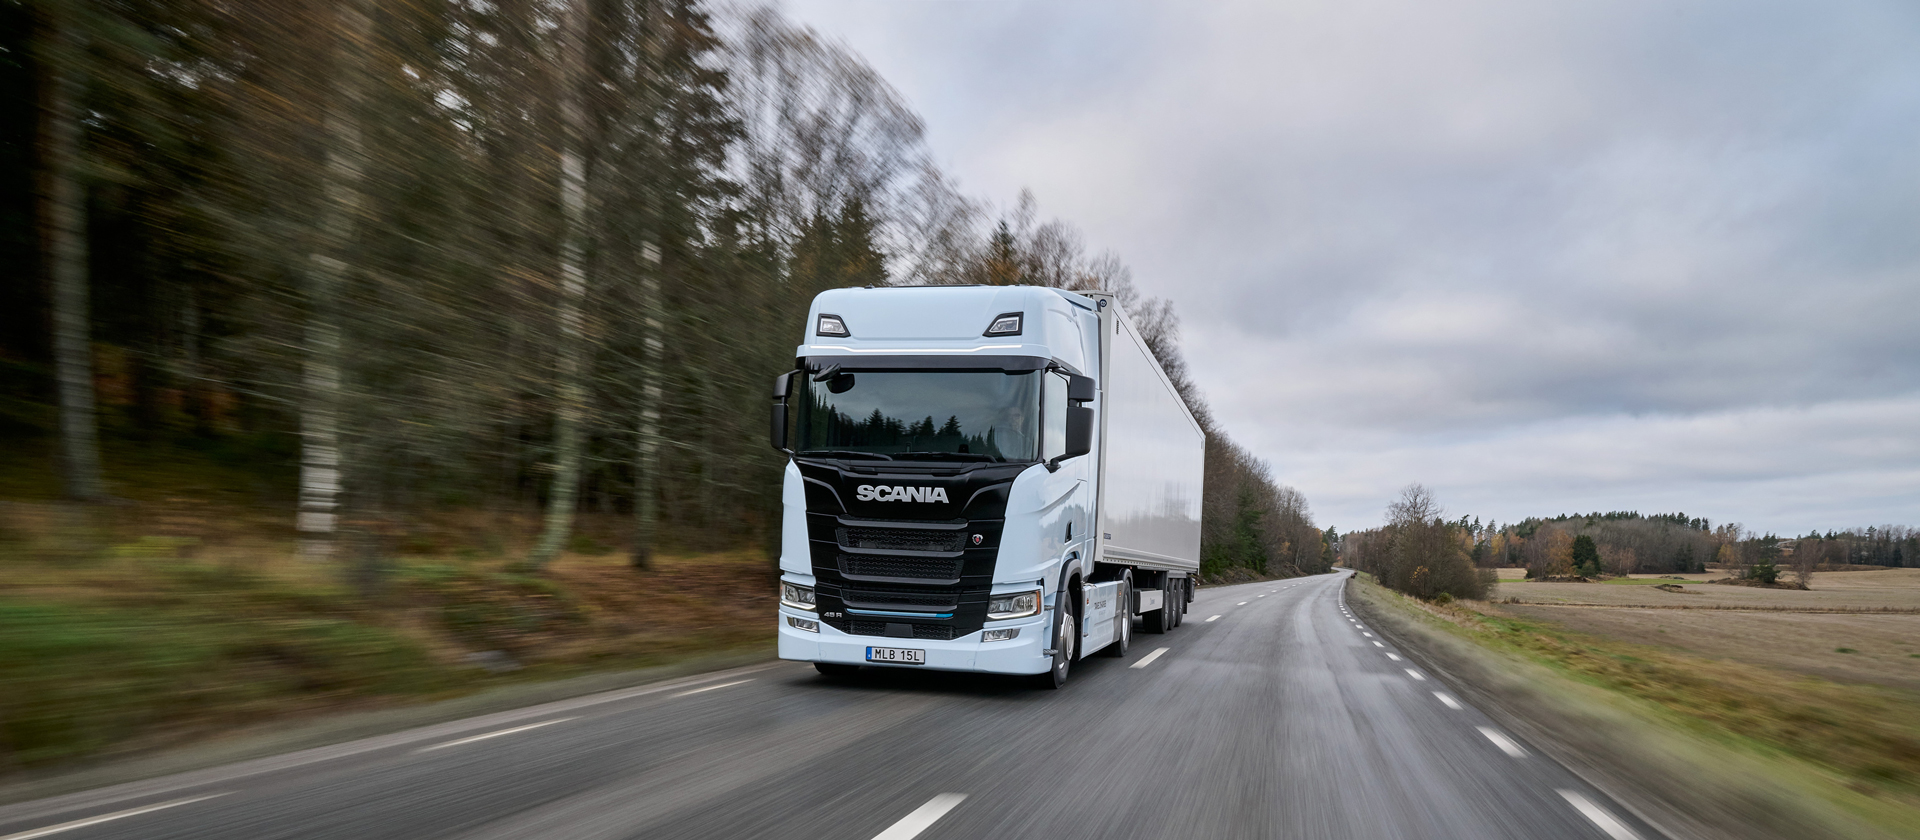 Scania’s regional battery electric vehicles